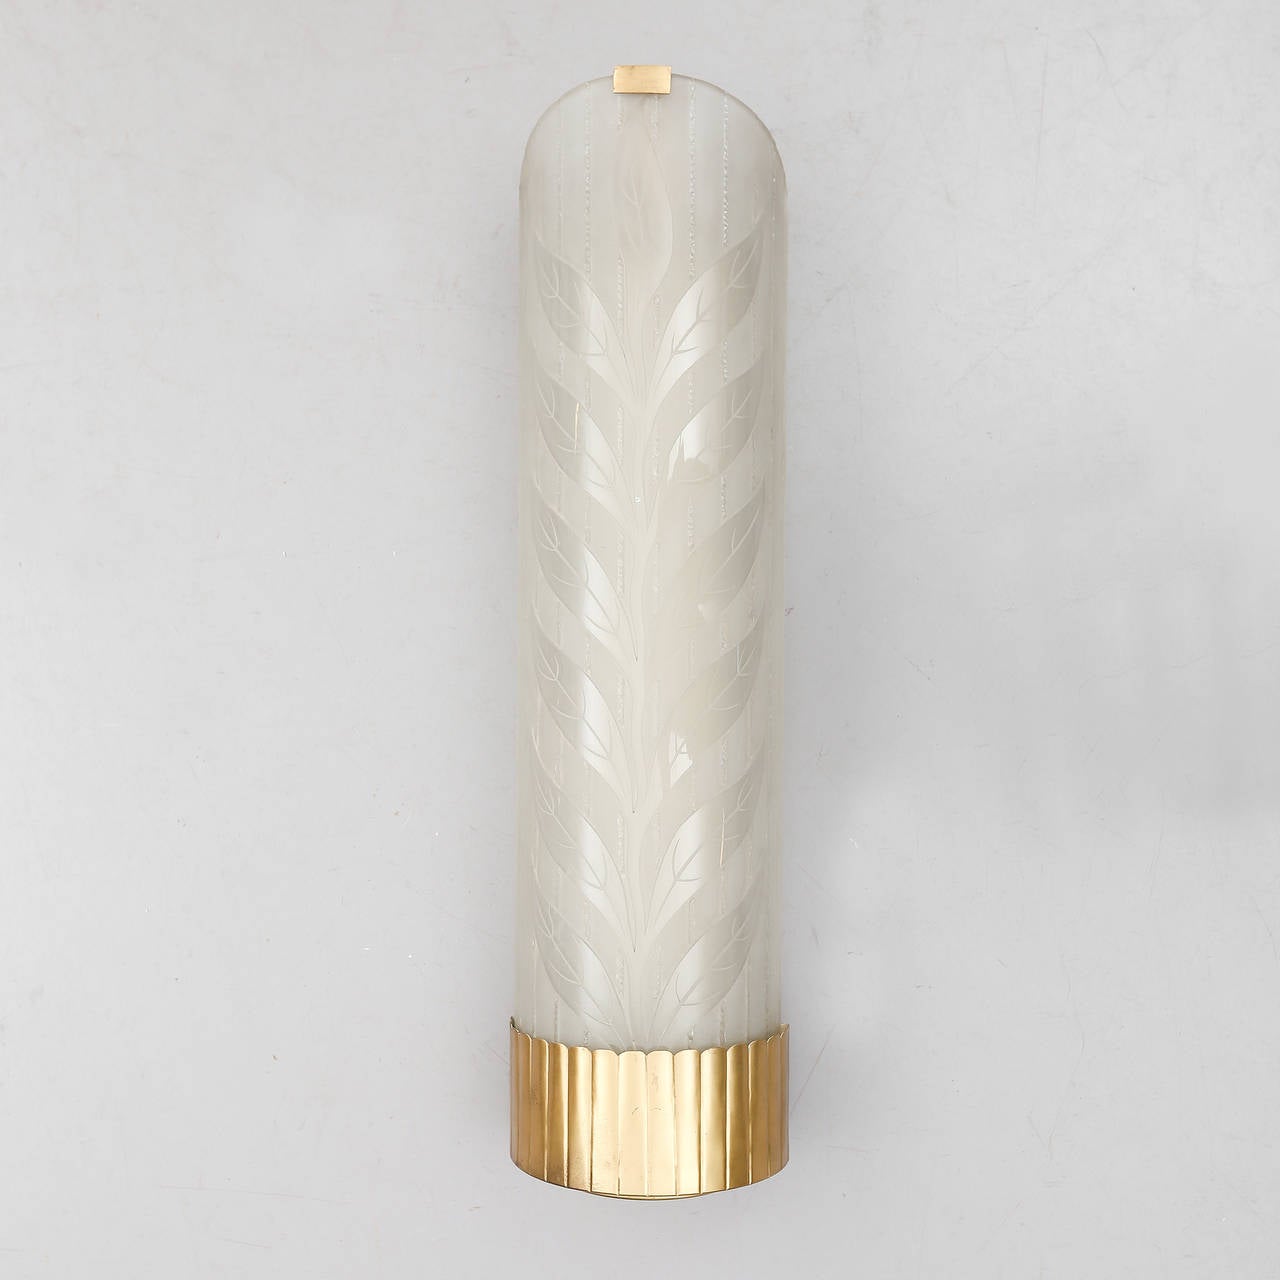 Extra Large Wall light with shade by Glössner & Co., circa 1940s.
Cut glass and etched floral decoration. Brass fitting.
Measures: H 77 cm/30,3